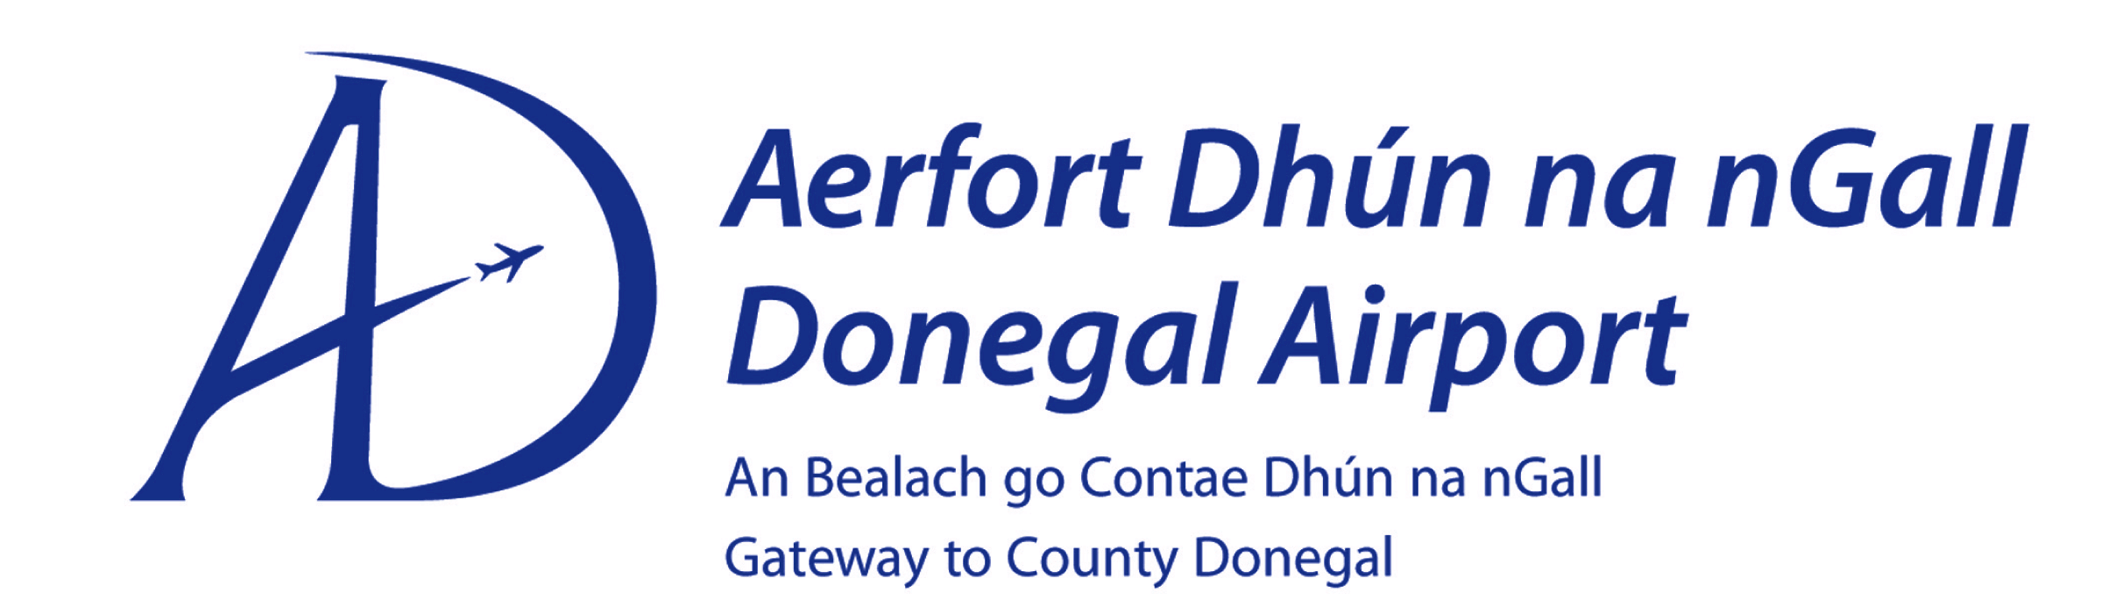 DonegalAirportBlue 2013